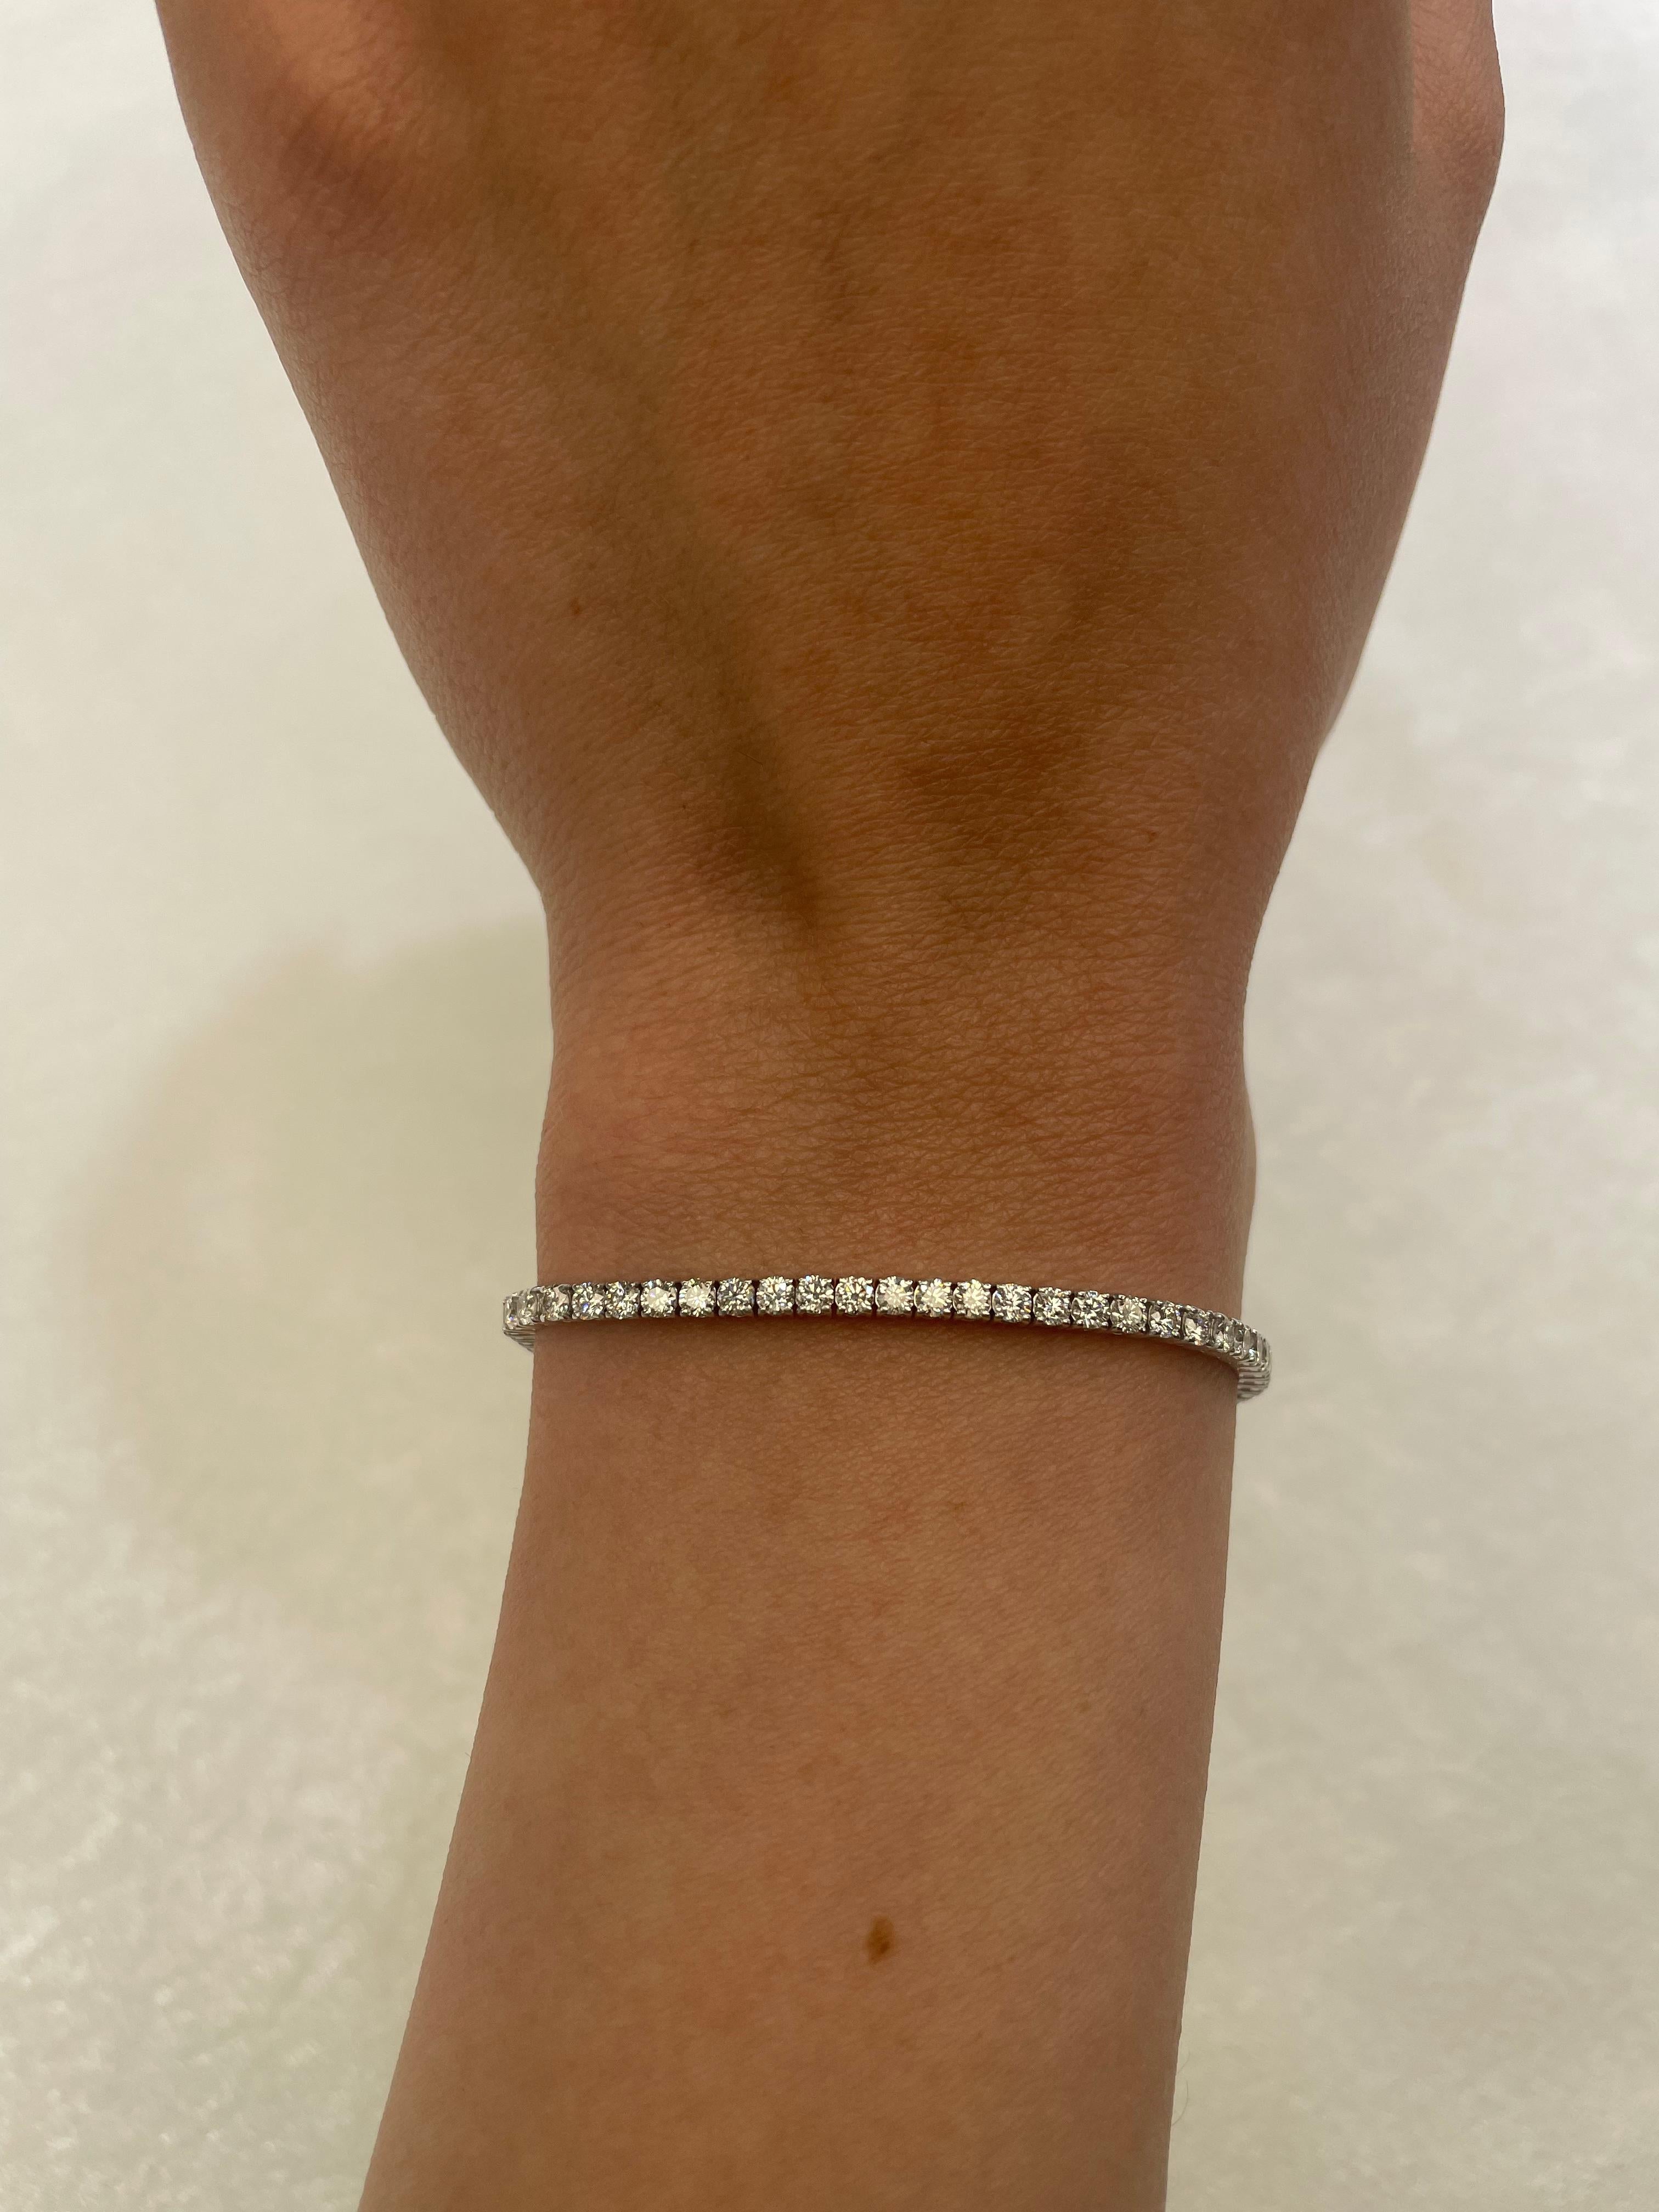 Exquisite and timeless diamonds tennis bracelet, by Alexander Beverly Hills.
73 round brilliant diamonds, 3.52 carats total. Approximately G/H color and VS clarity. Four prong set in 14k white gold, 6.63 grams, 7 inches. 
Accommodated with an up to